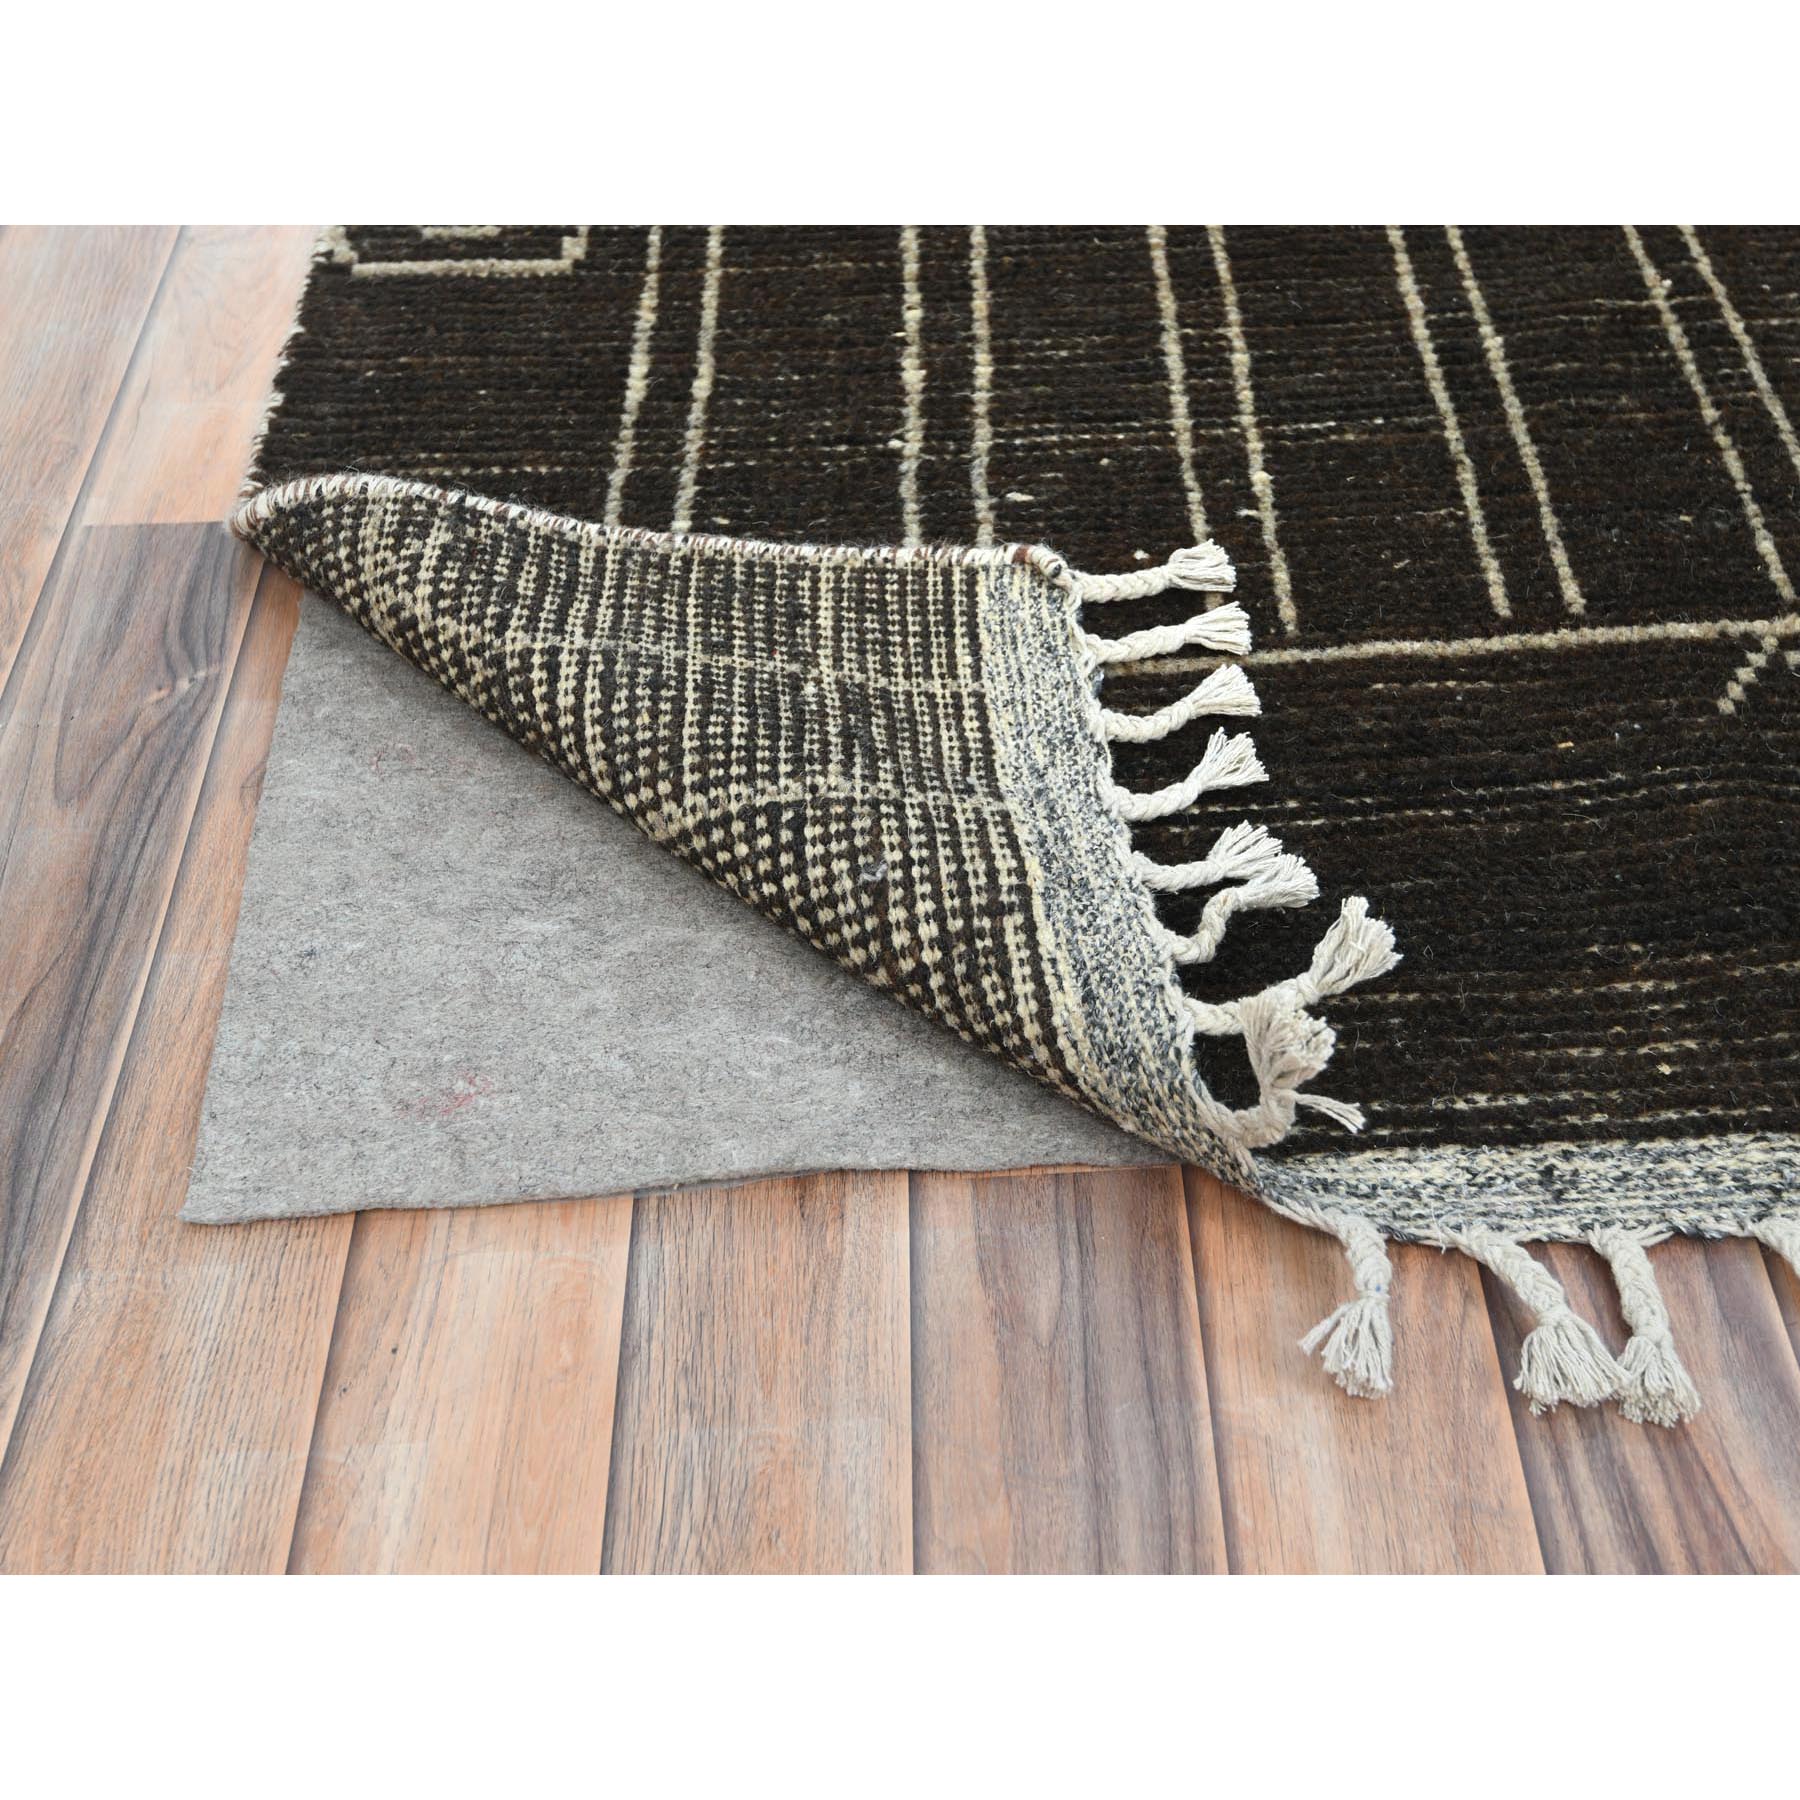 9'2"x12'2" Dark Chocolate Brown, Ben Ourain Moroccan Berber Influence Design, Natural Dyes, Extra Soft Wool, Hand Woven Oriental Rug 